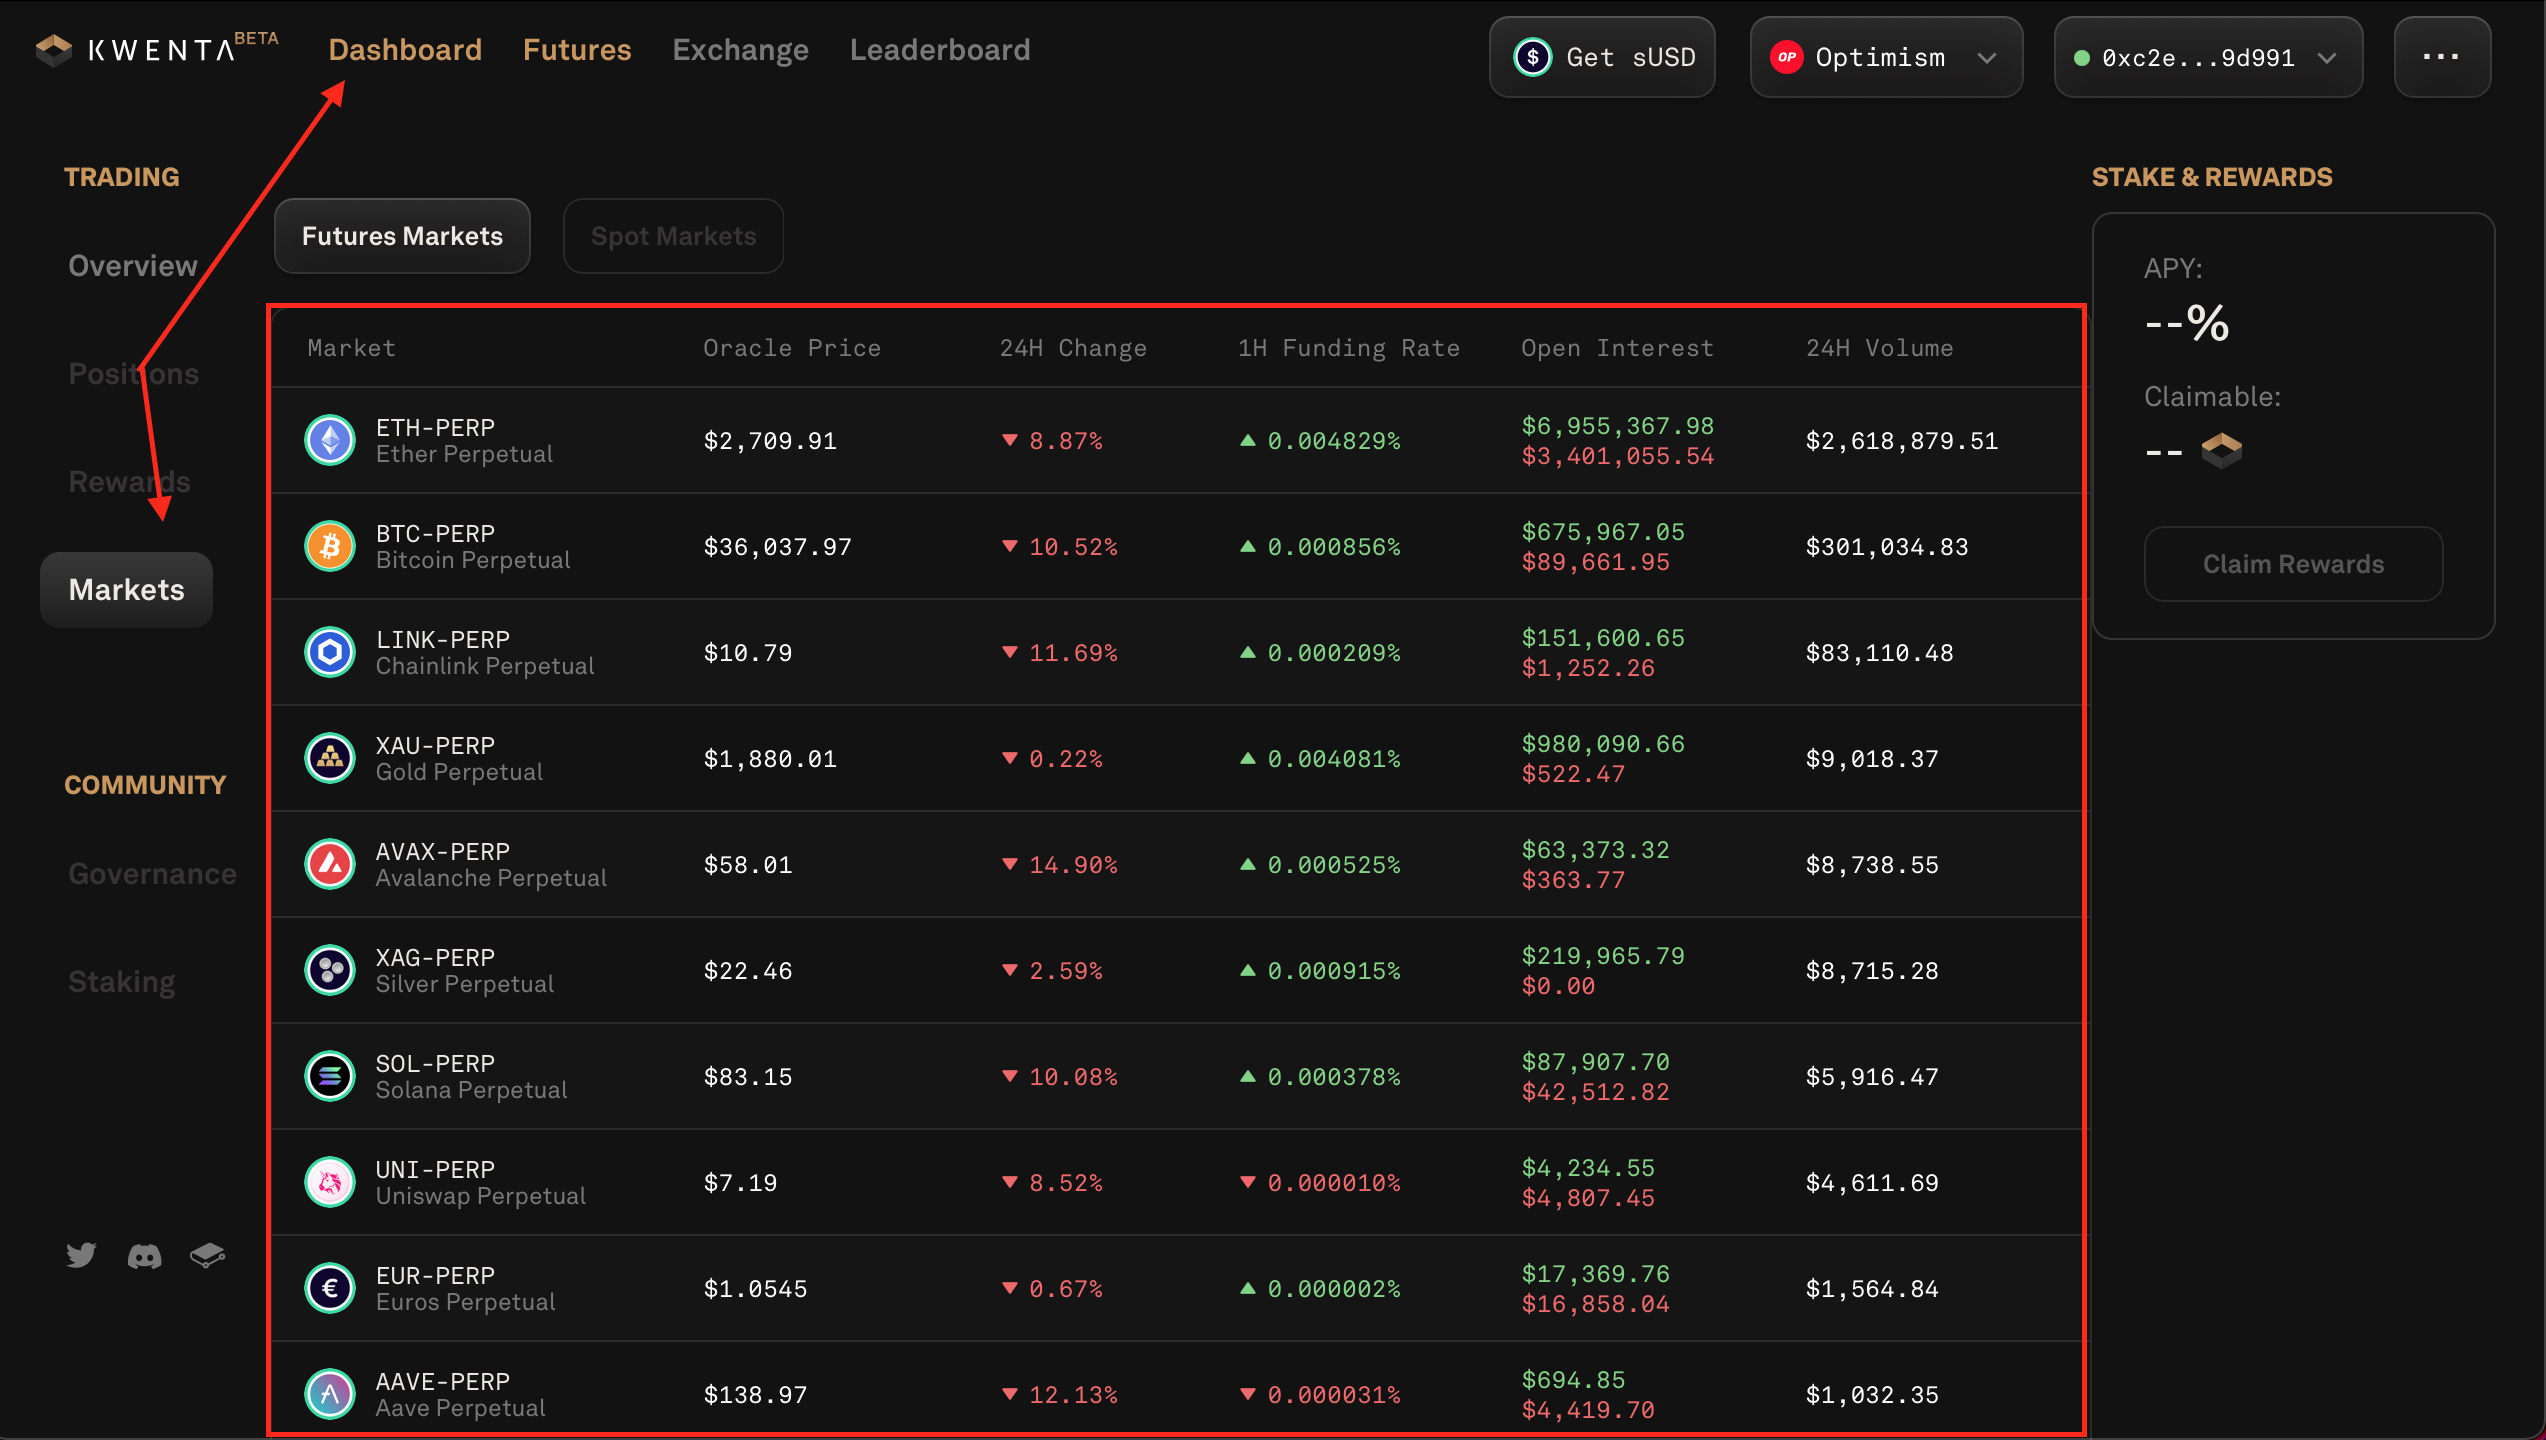 New Markets Overview Page